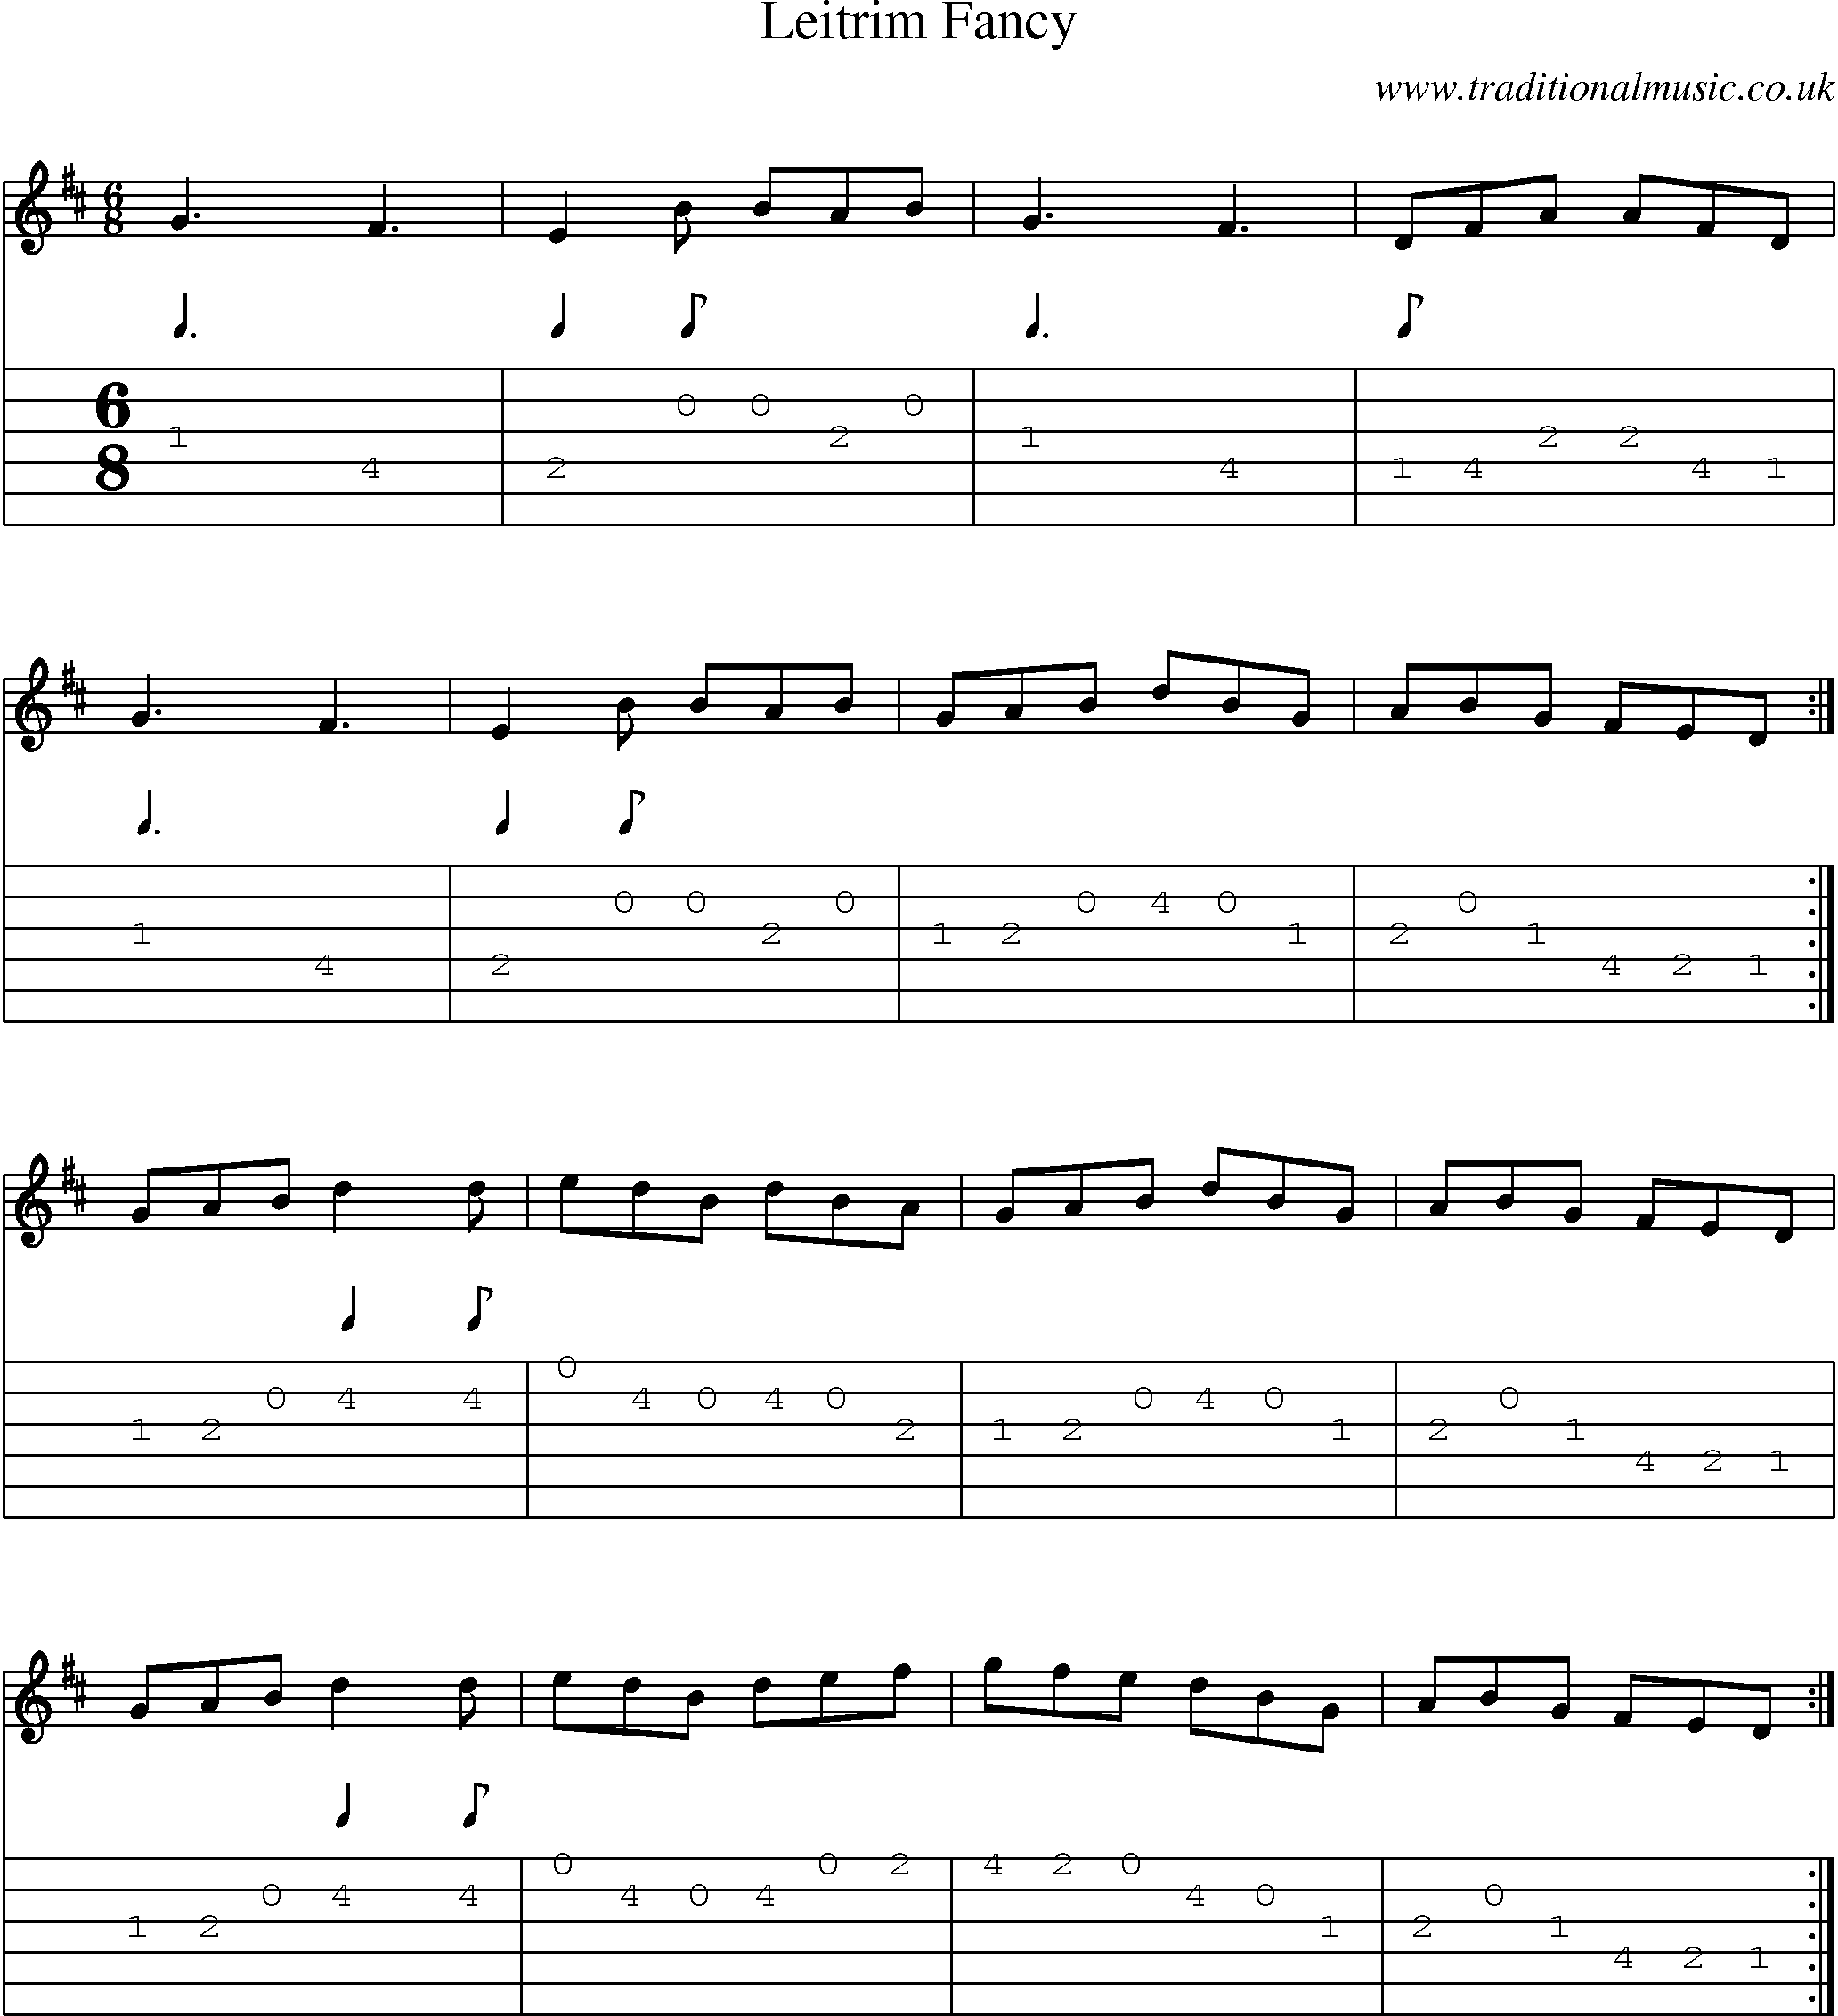 Music Score and Guitar Tabs for Leitrim Fancy